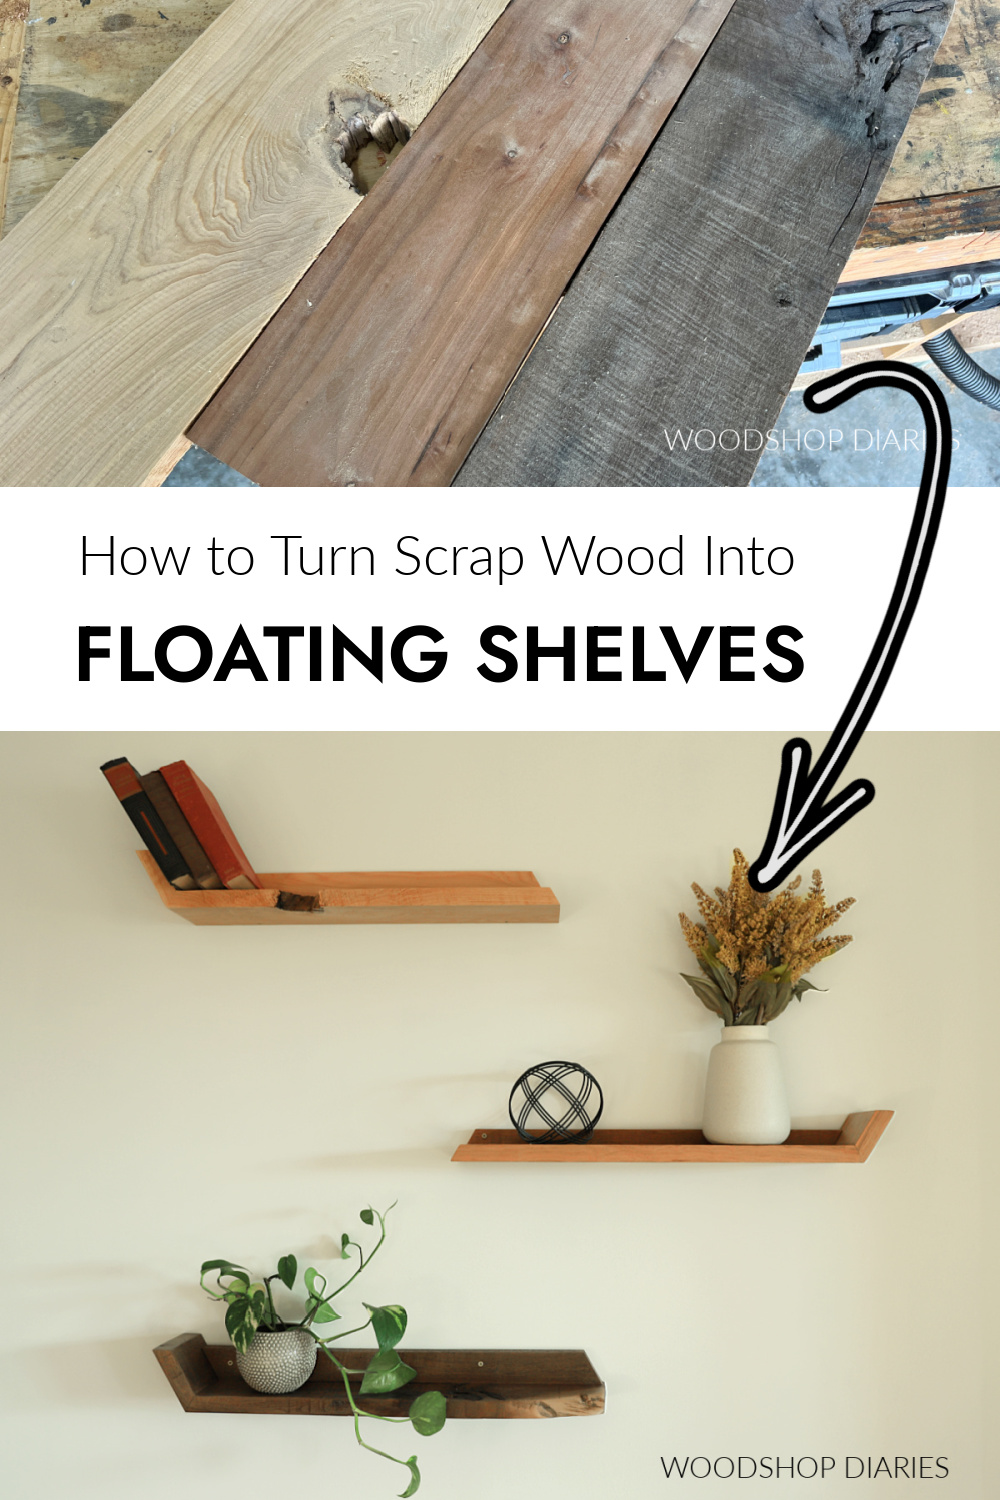 Pinterest collage image showing three wood types at top and completed floating shelves at bottom with text "how to turn scrap wood into floating shelves"